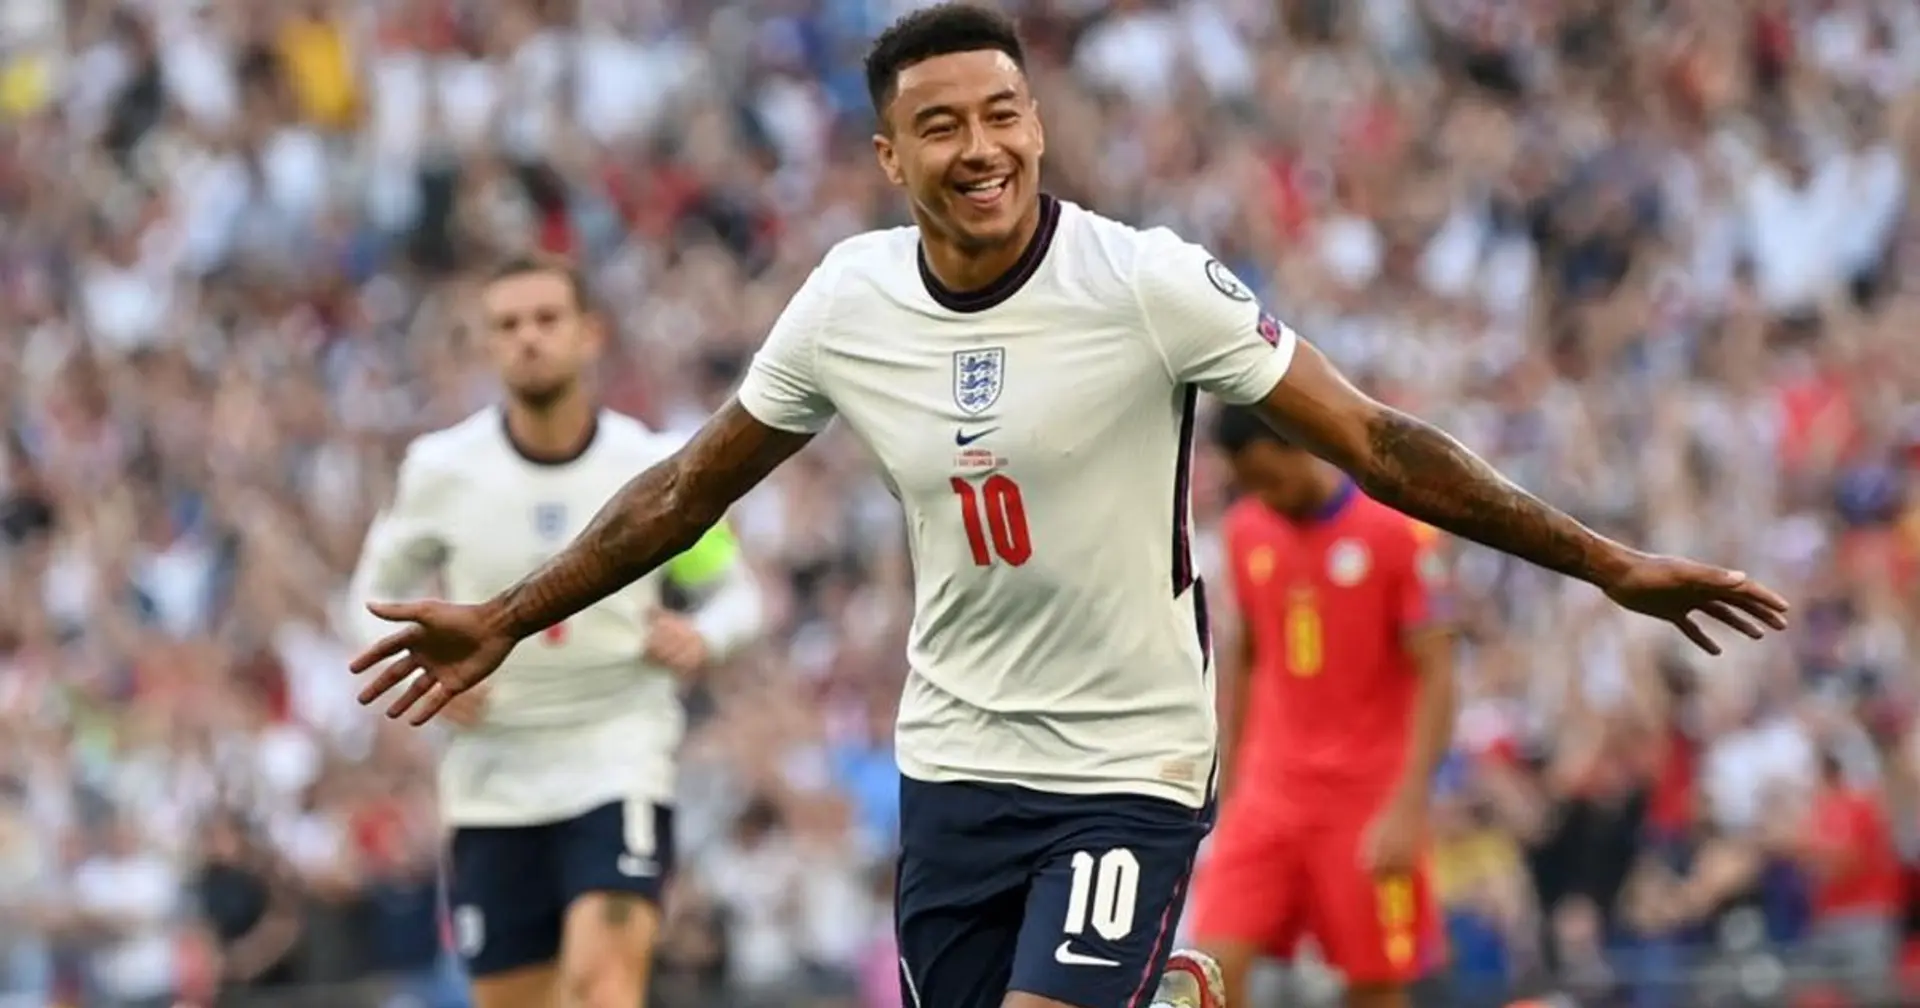 2 goals, 3 dribbles completed  & more: Lingard excels in England's big win over Andorra